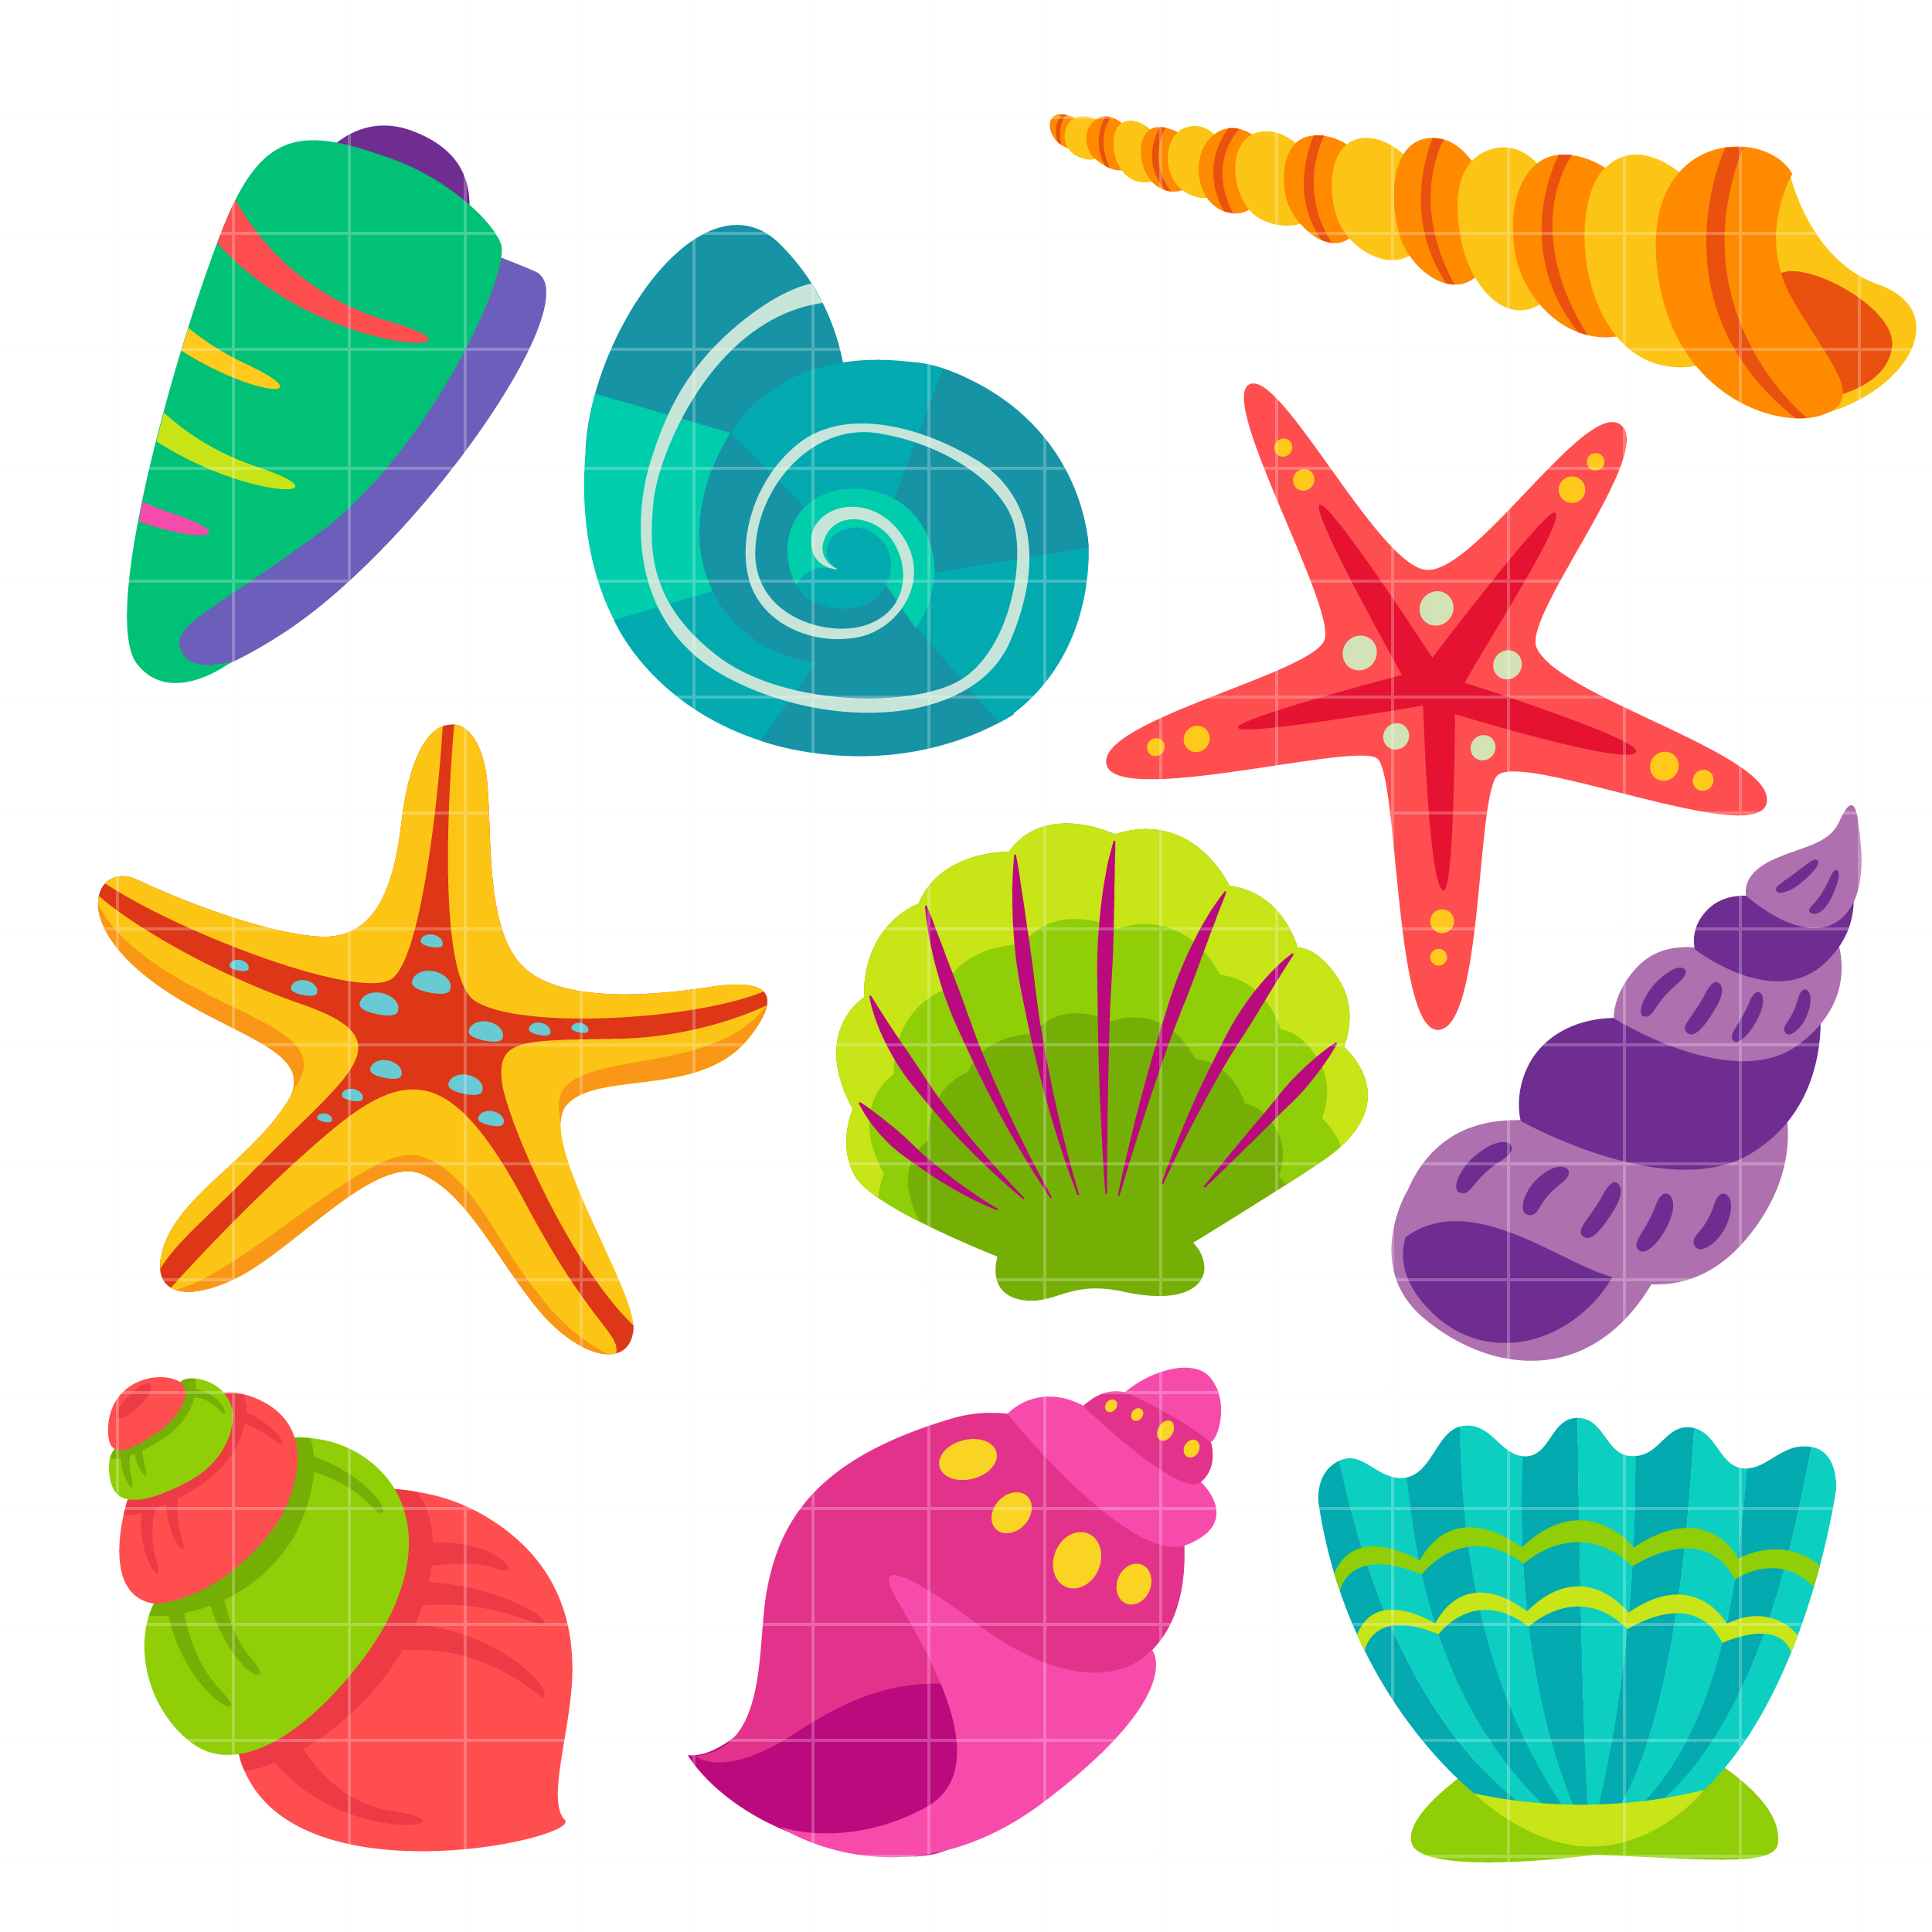 Pink Scallop Seashell Clipart